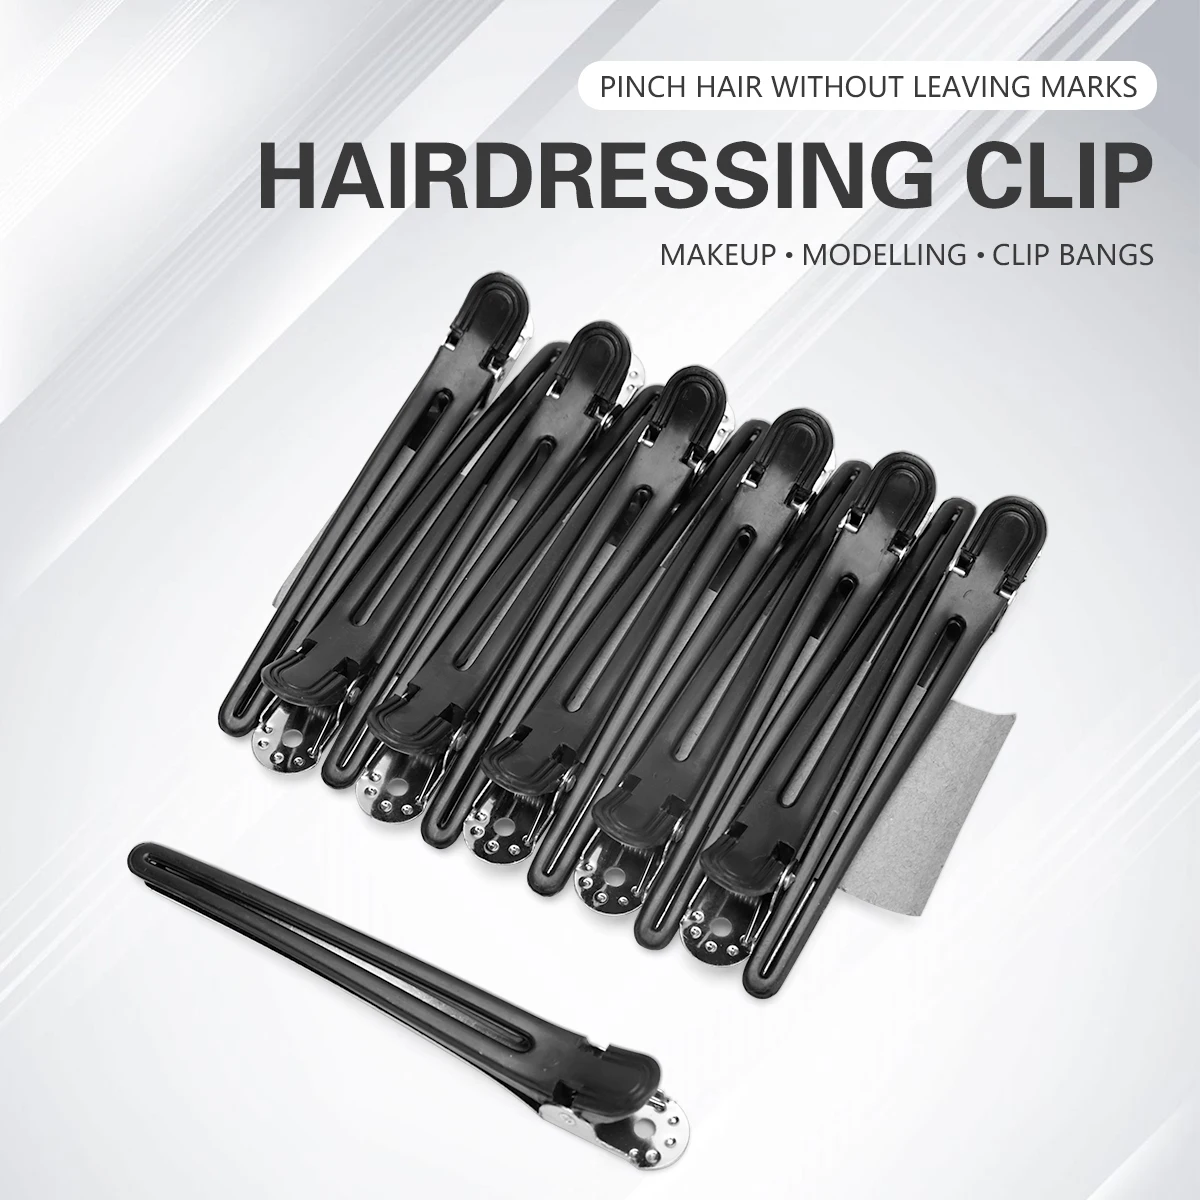 12Pcs Hairdressing Clamps Claws Section Clips Plastic Alligator Hairpin Salon Hair Clips Styling Barbershop Supplies